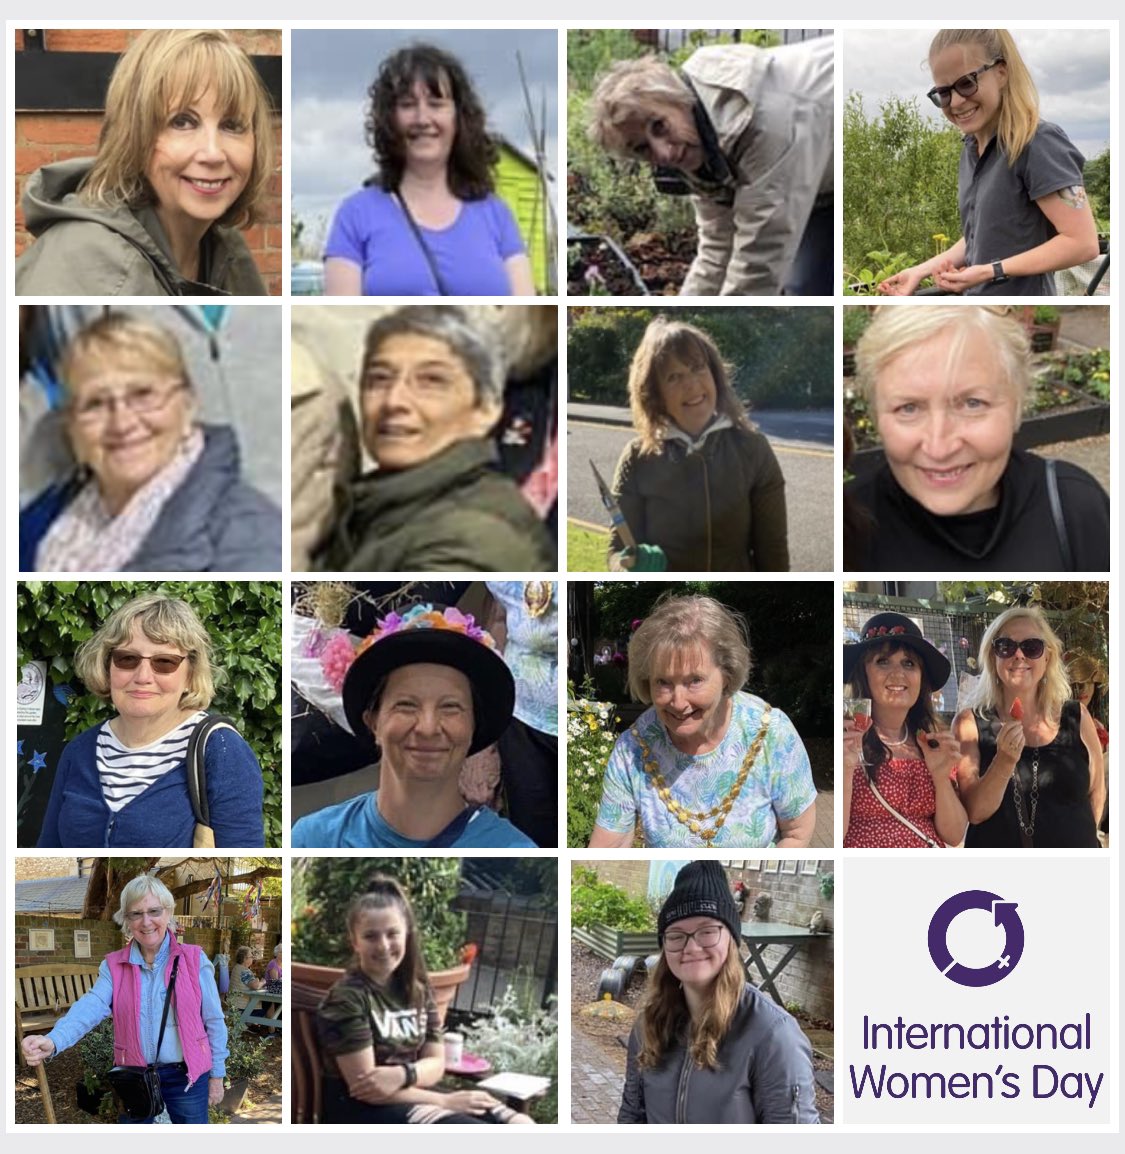 Happy International woman’s day to all the beautiful Epping in bloom lady volunteers and all the ladies around the globe 🥰 🐝🪴🍃❤️ #internationalwomensday #Epping #Eppinginbloom #volunteers